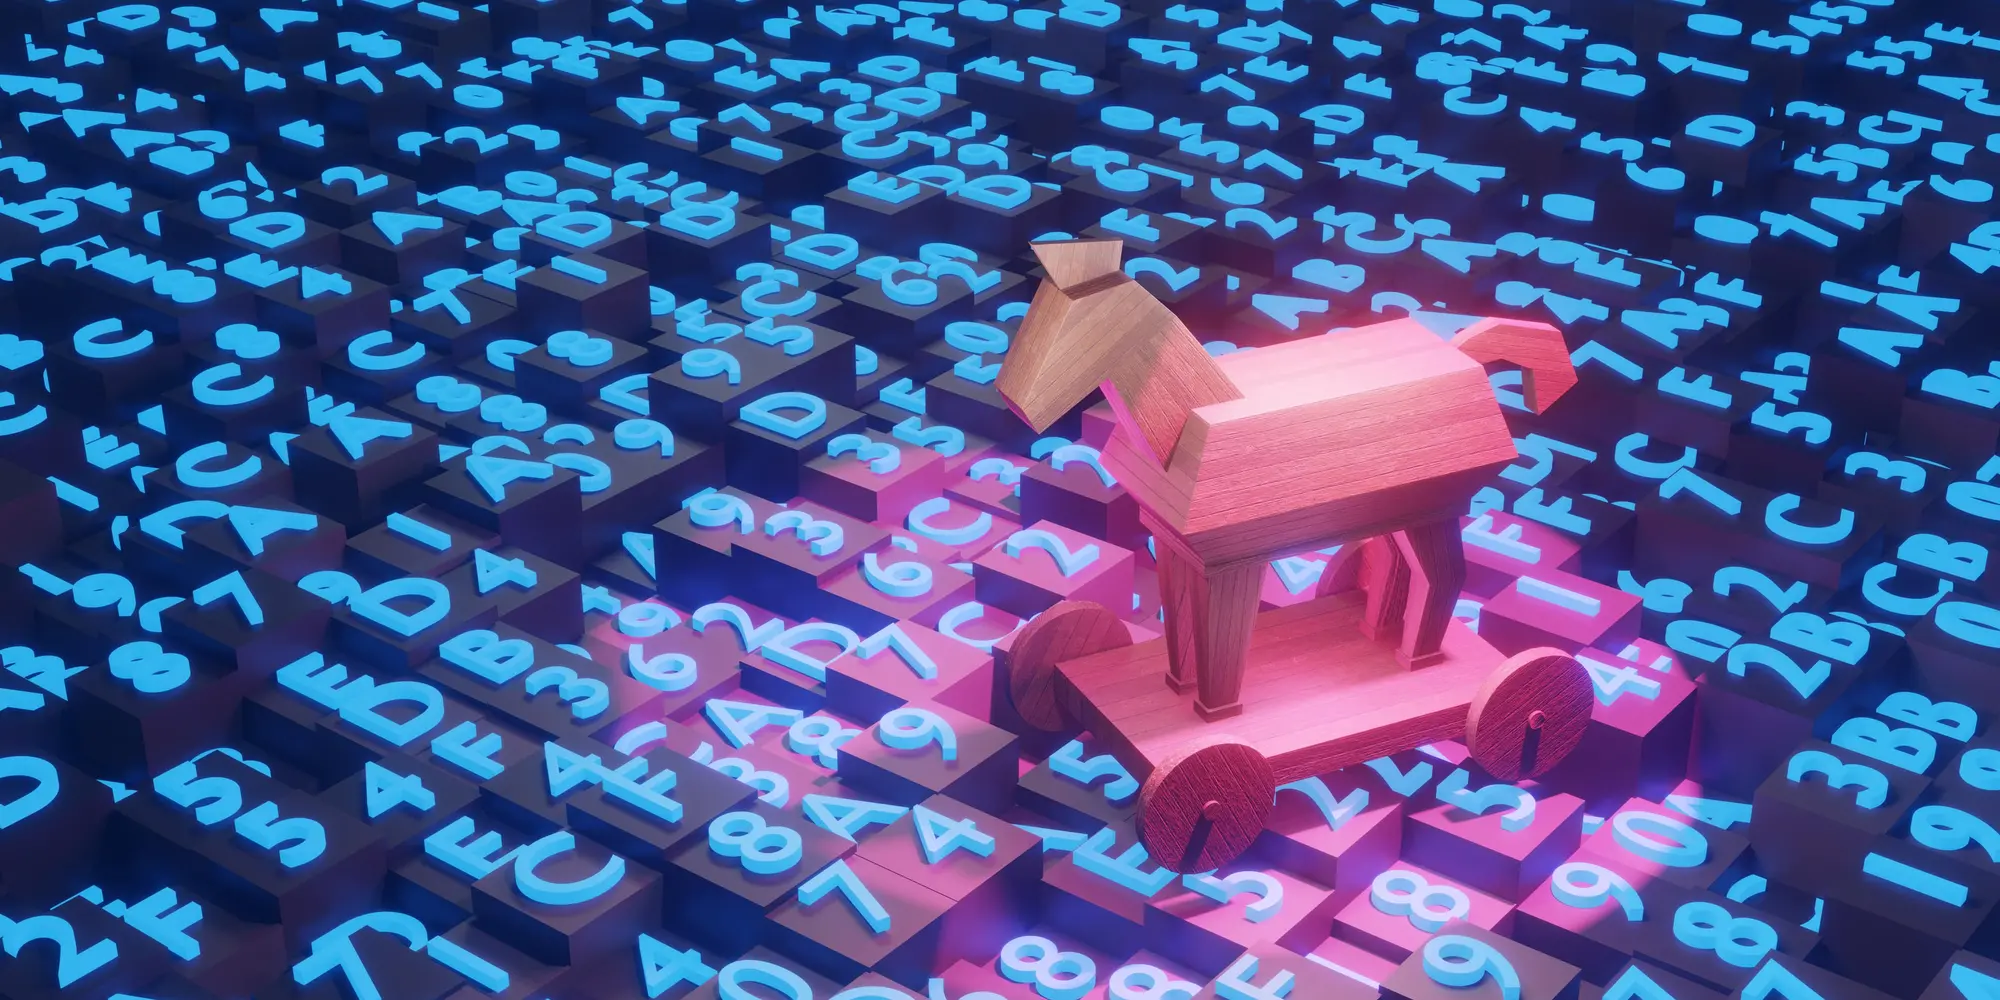 Trojan horse on top of blocks of hexadecimal programming codes. Illustration of the concept of online hacking, computer spyware, malware and ransomware. stock photo